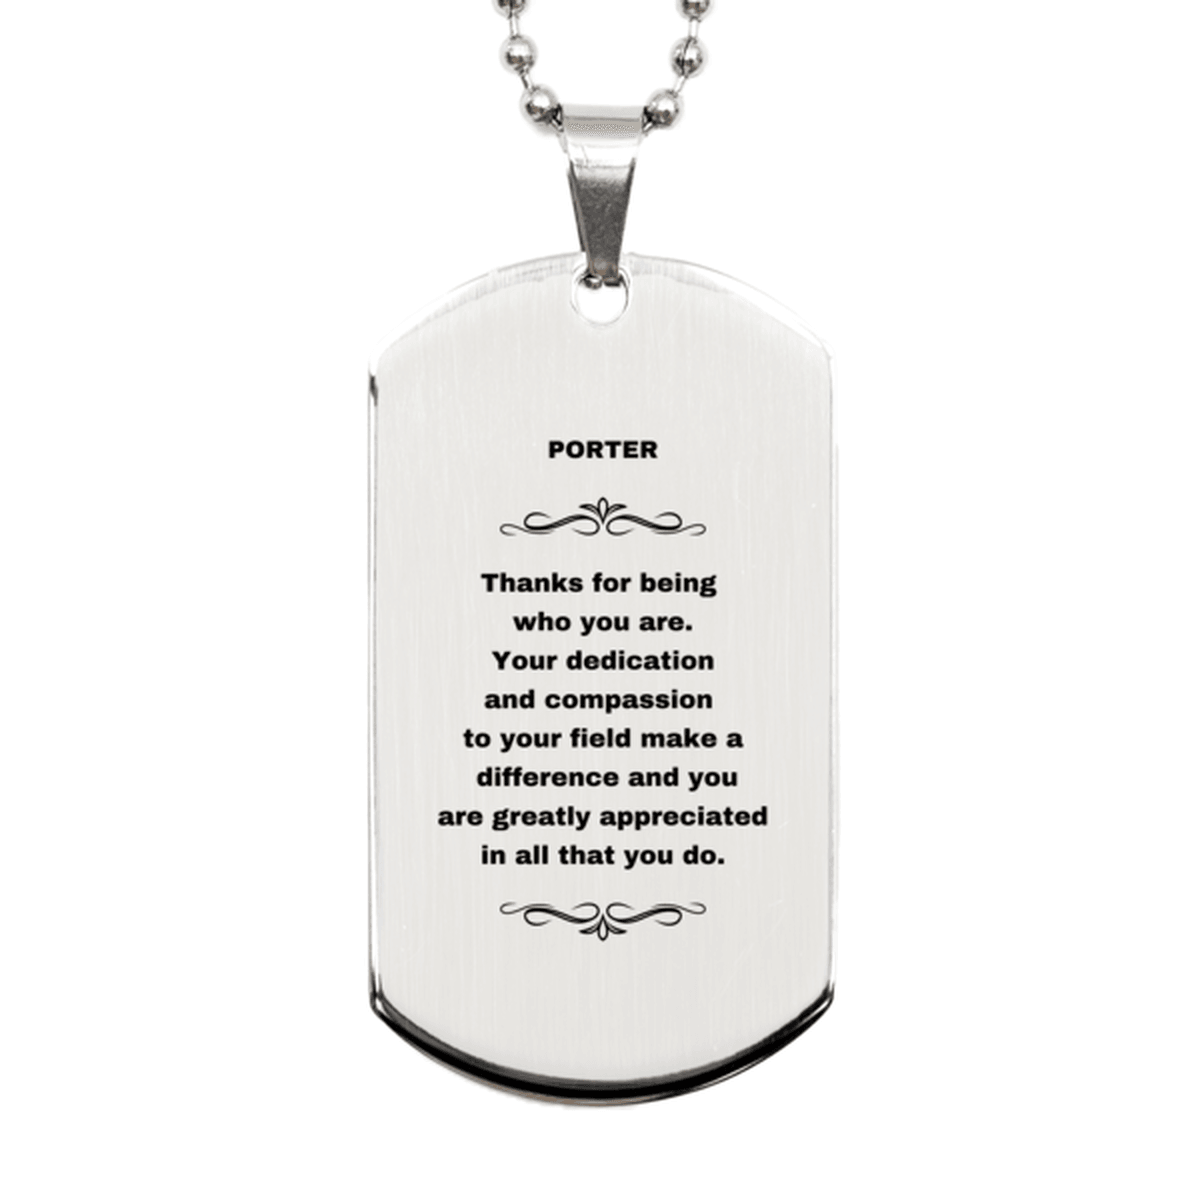 Porter Silver Dog Tag Engraved Necklace - Thanks for being who you are - Birthday Christmas Jewelry Gifts Coworkers Colleague Boss - Mallard Moon Gift Shop